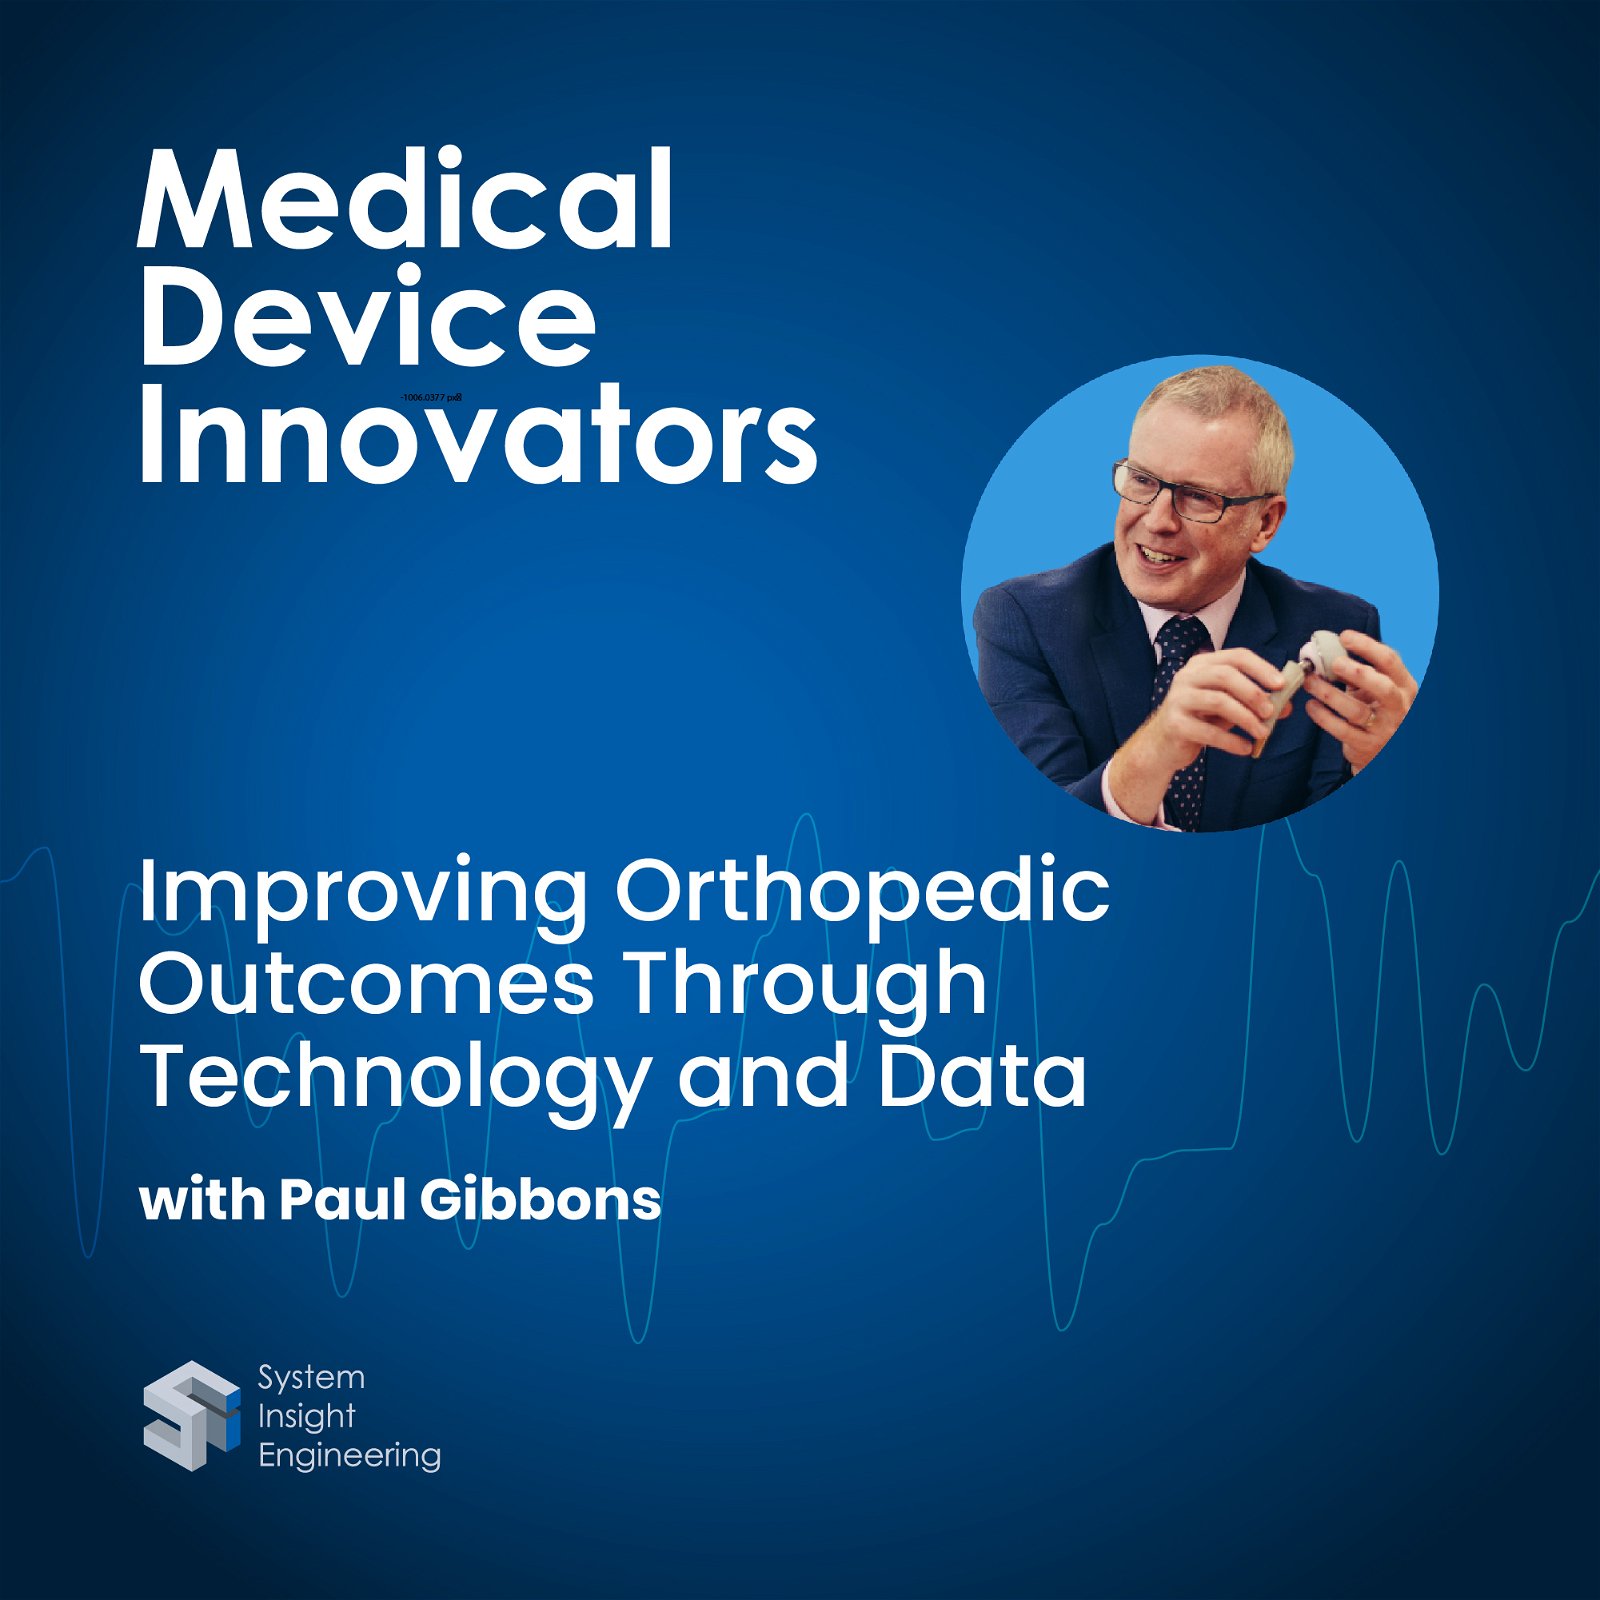 Improving Orthopedic Outcomes Through Technology and Data with Paul Gibbons at Corin Group PLC